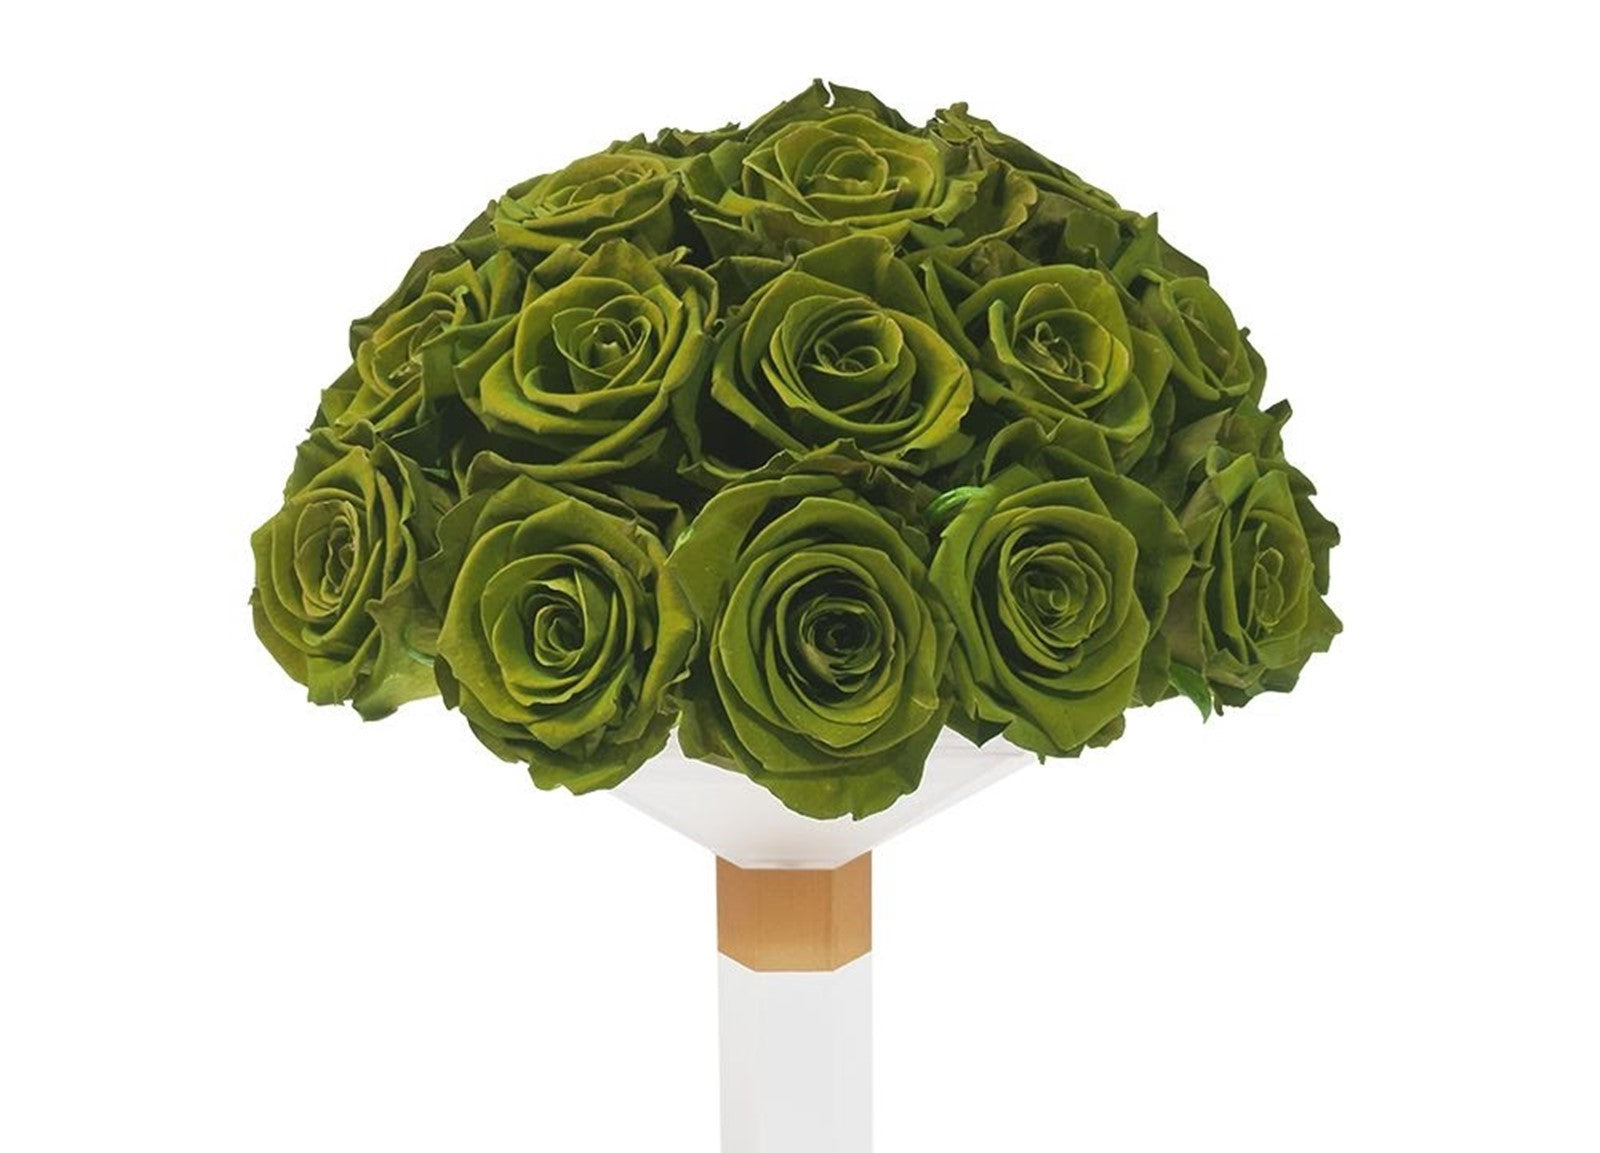 Green Roses Meaning: The Real Story of the Green Rose